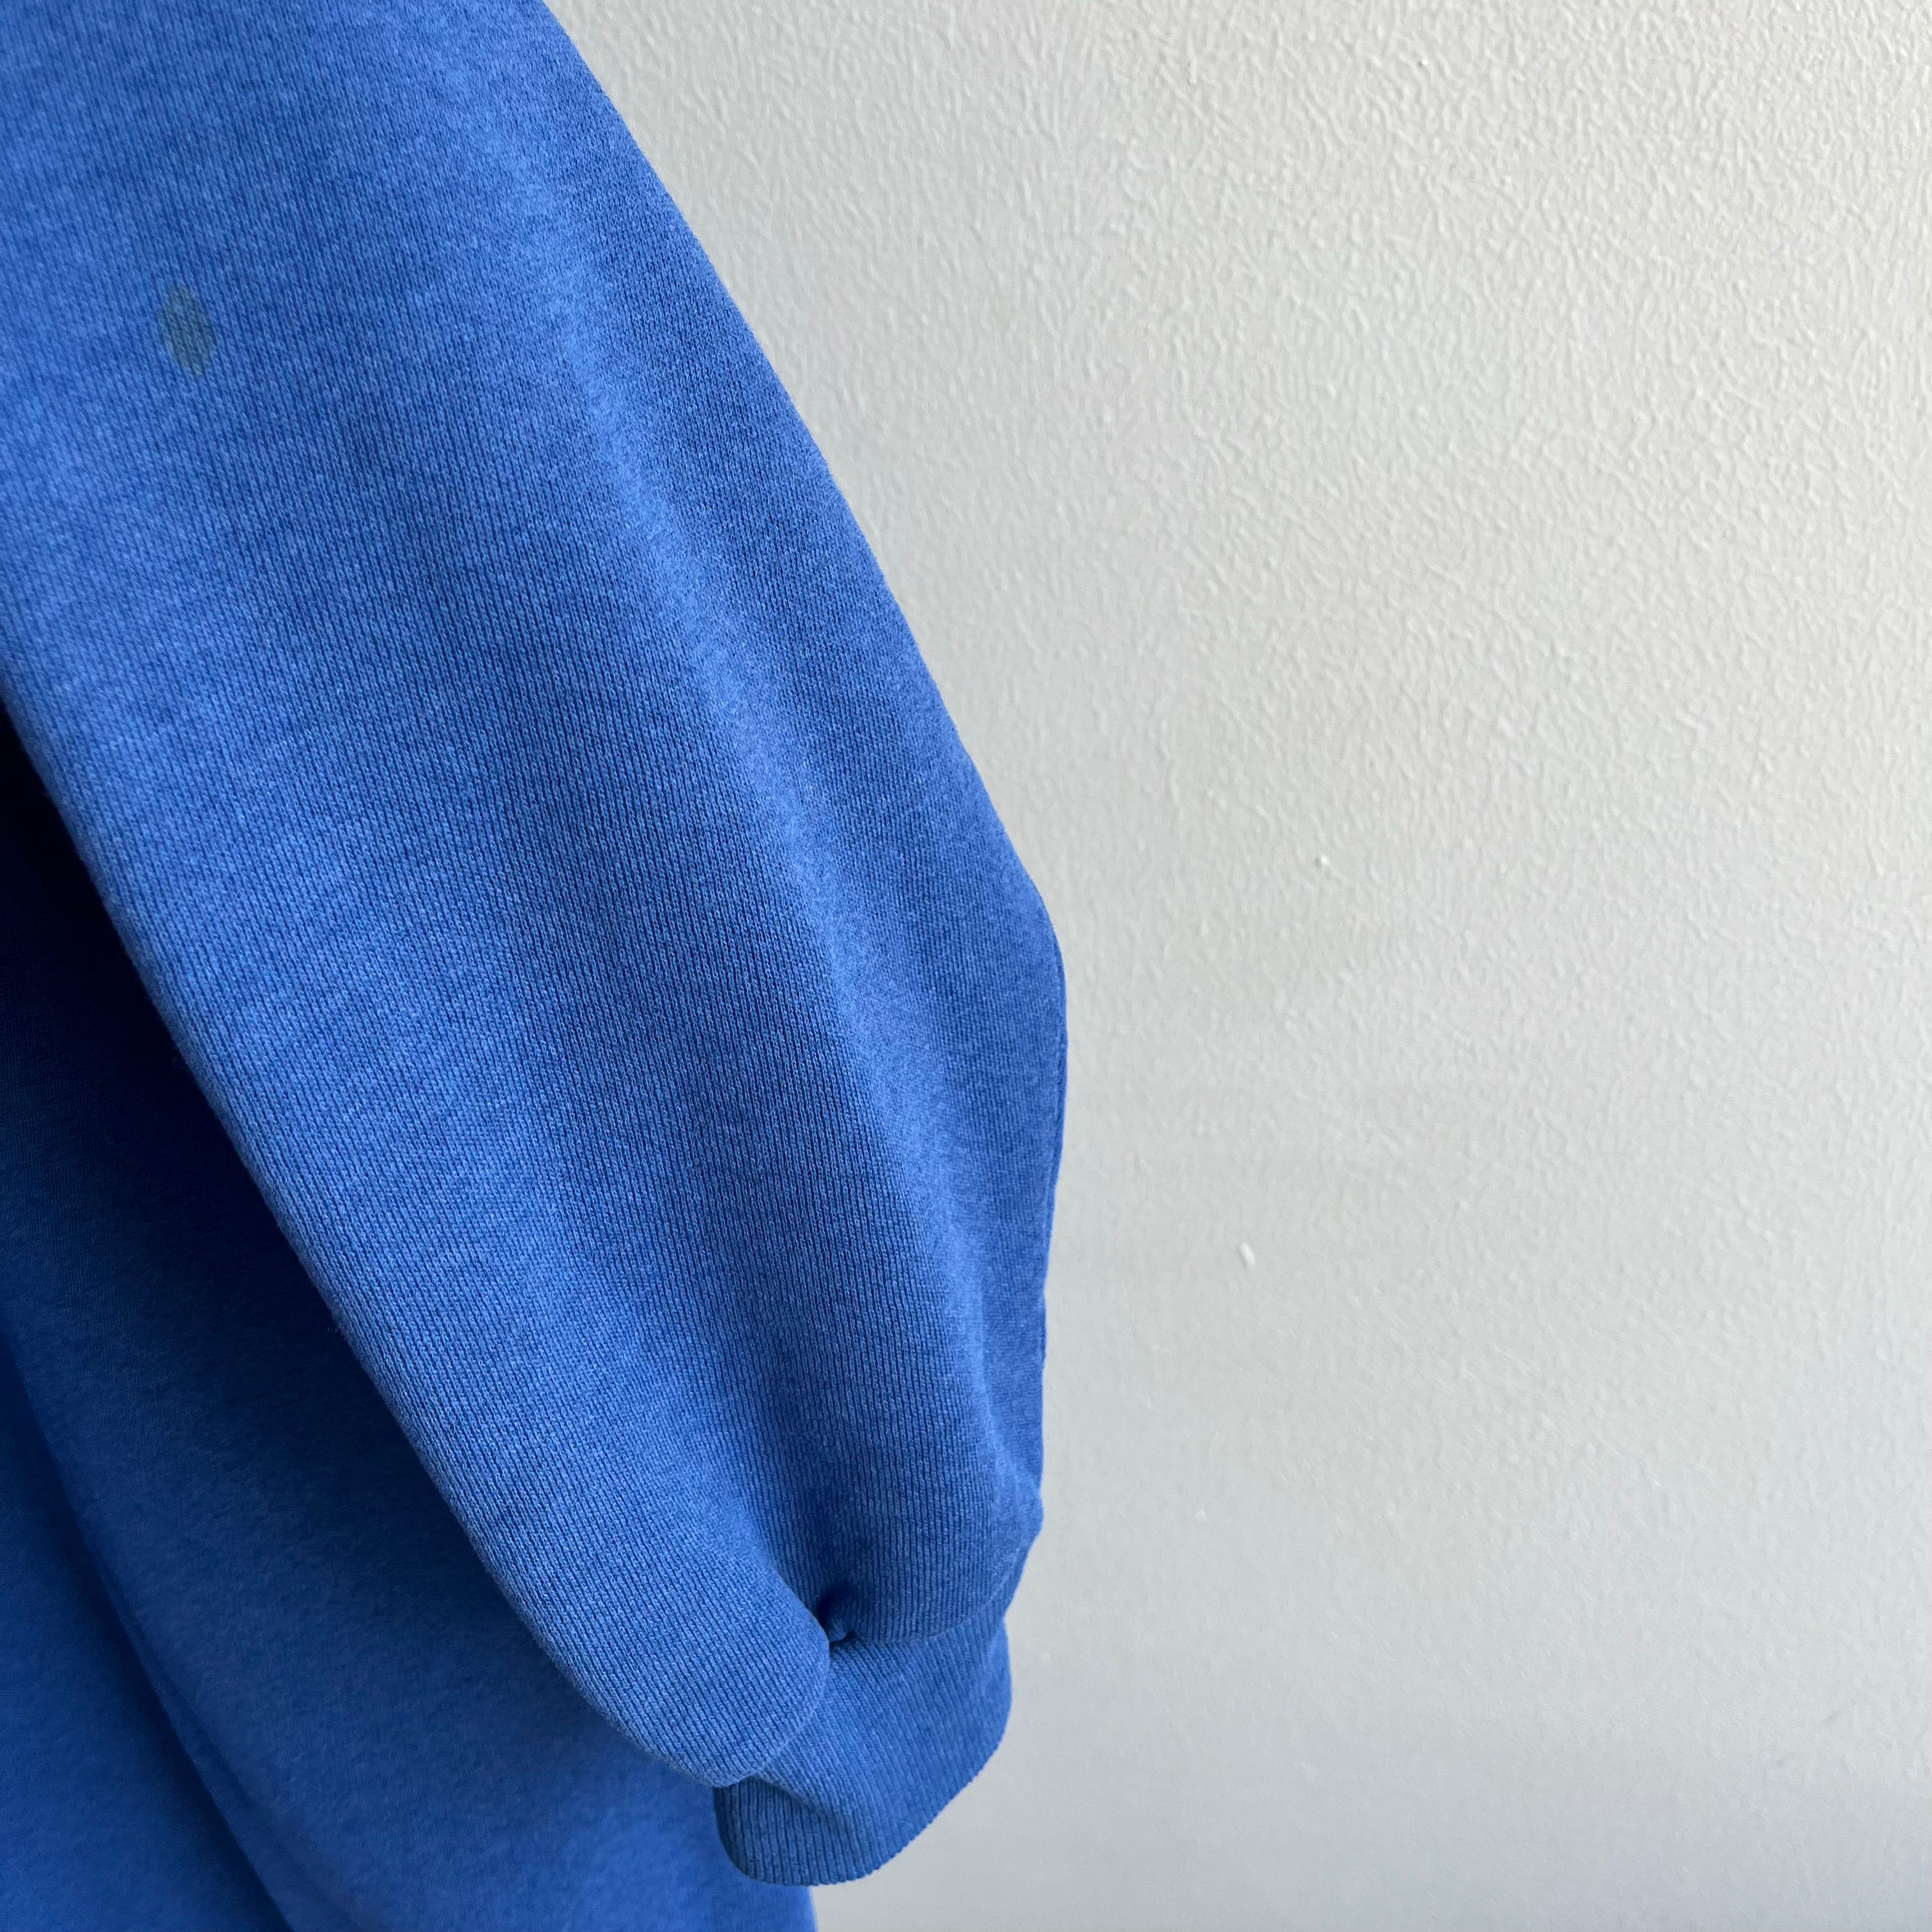 1990s Blank Blue Sweatshirt with Dreamy Arms